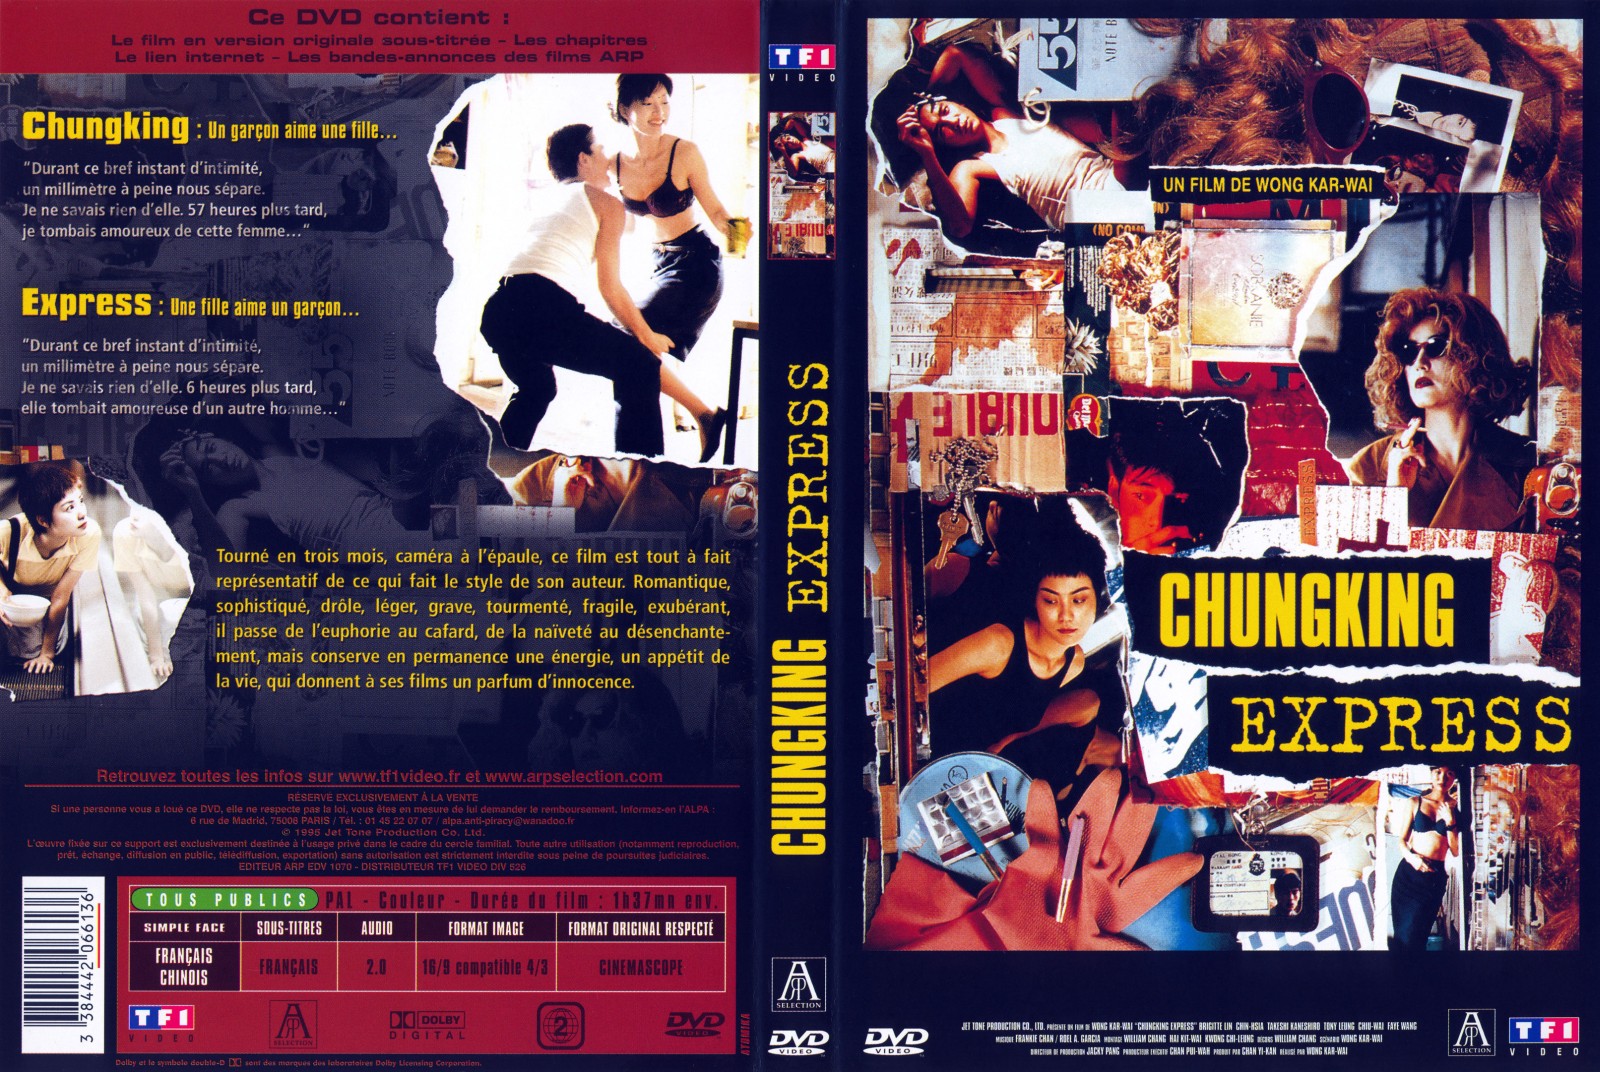 Jaquette DVD Chungking express